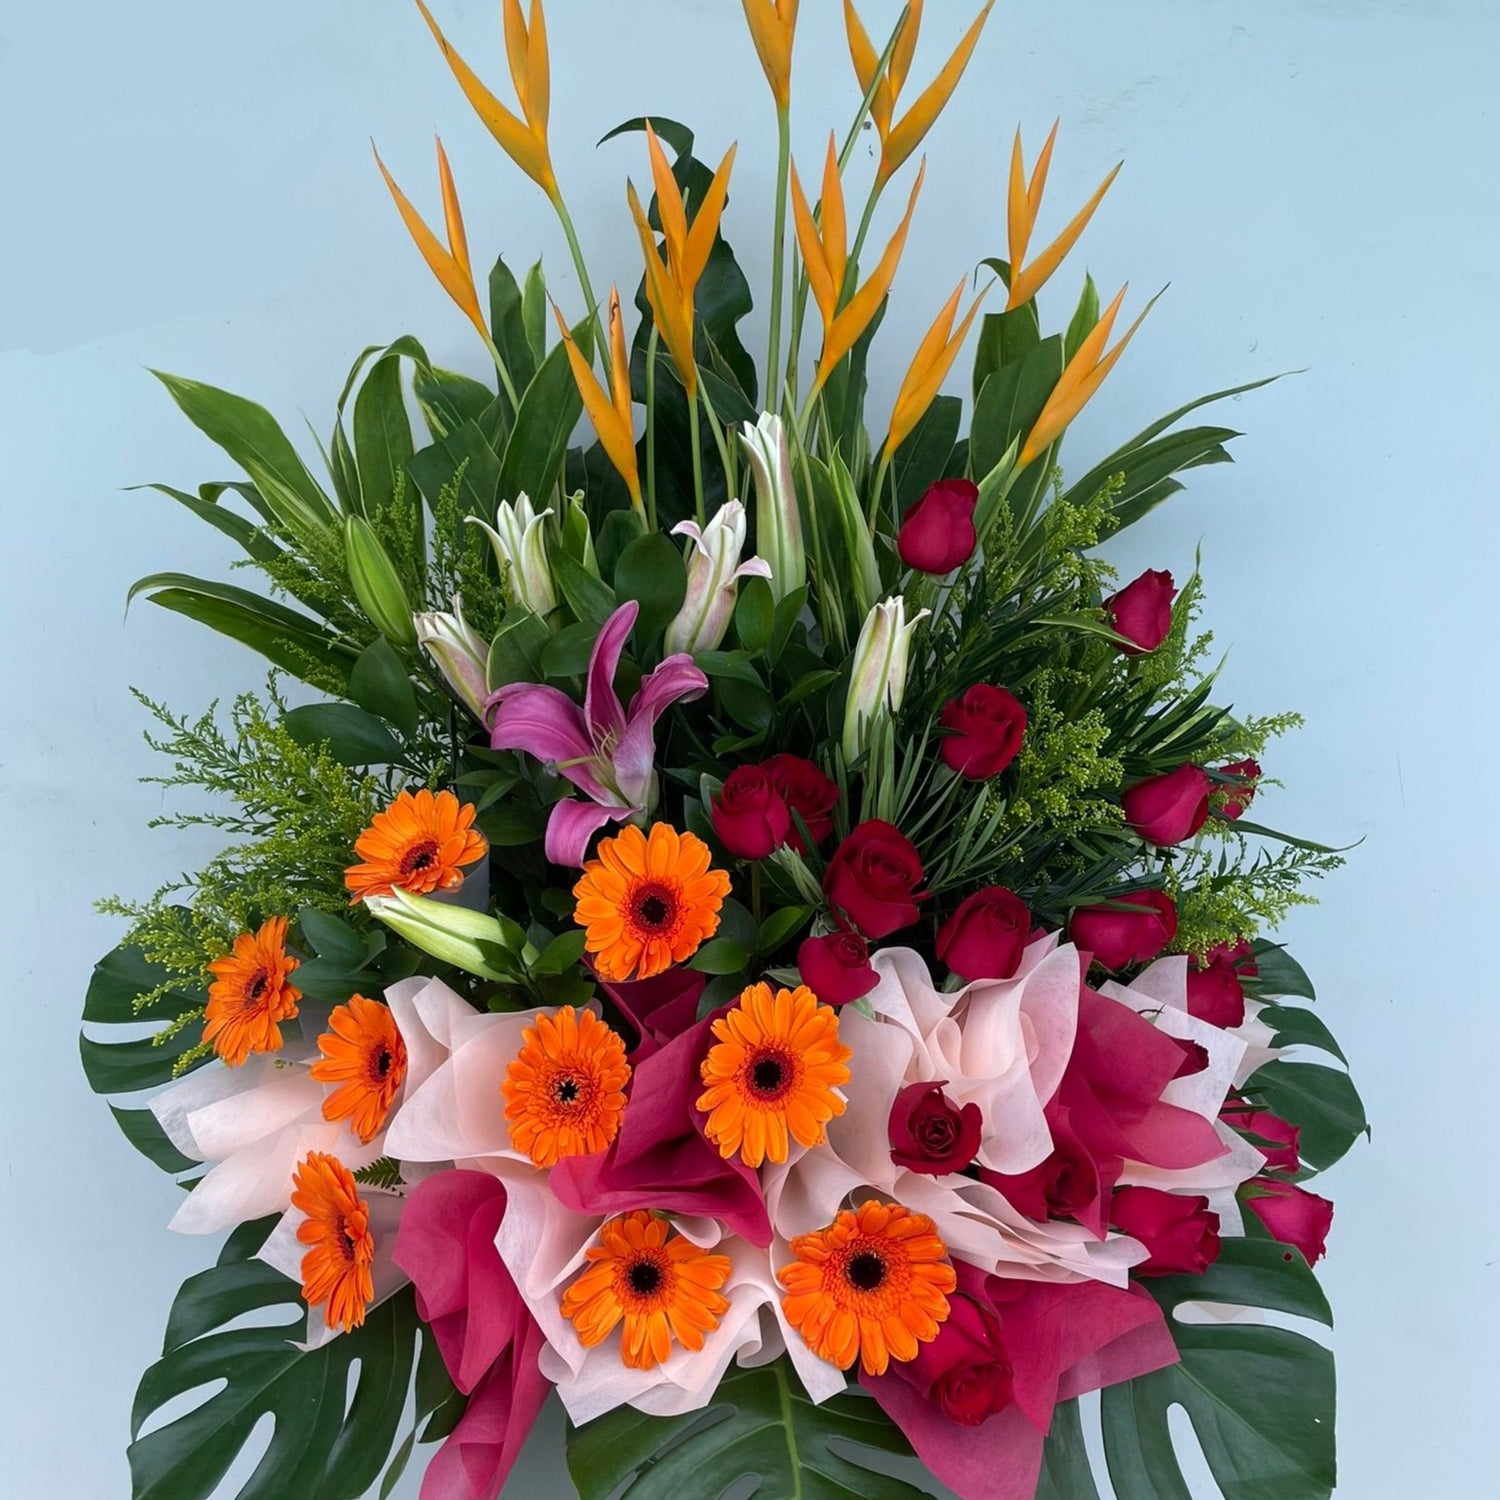 Cheap Real Gerbera Daisies, Roses, Lilies and Birds of Paradise Grand Opening Floral Stand Under $200 in Singapore Free Delivery